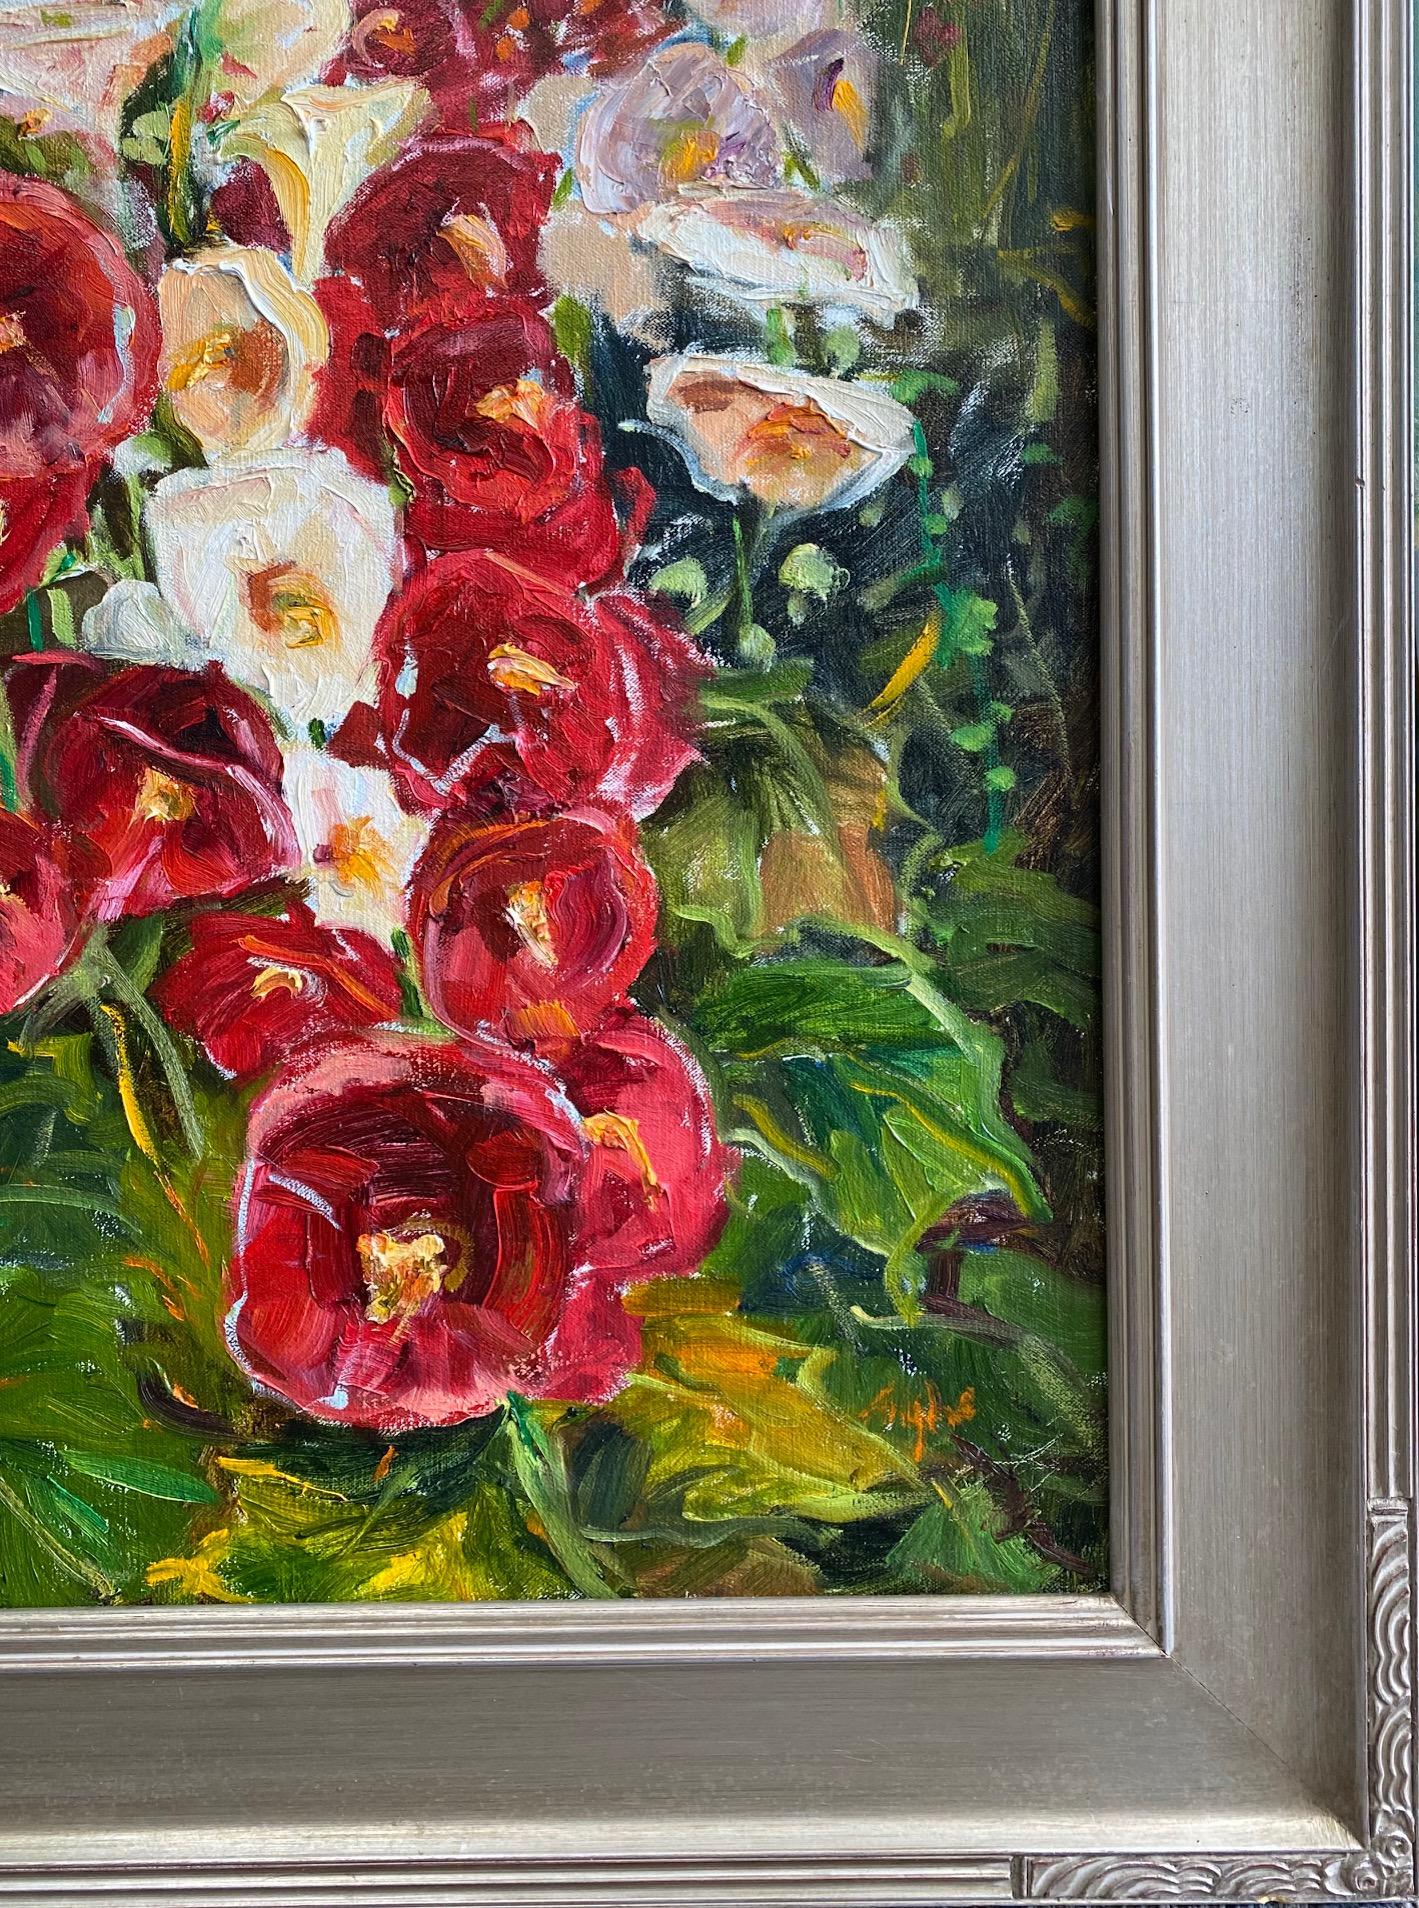 Hollyhocks in Full Bloom, original 30x24 expressionist floral landscape - Expressionist Painting by Doreen Tighe